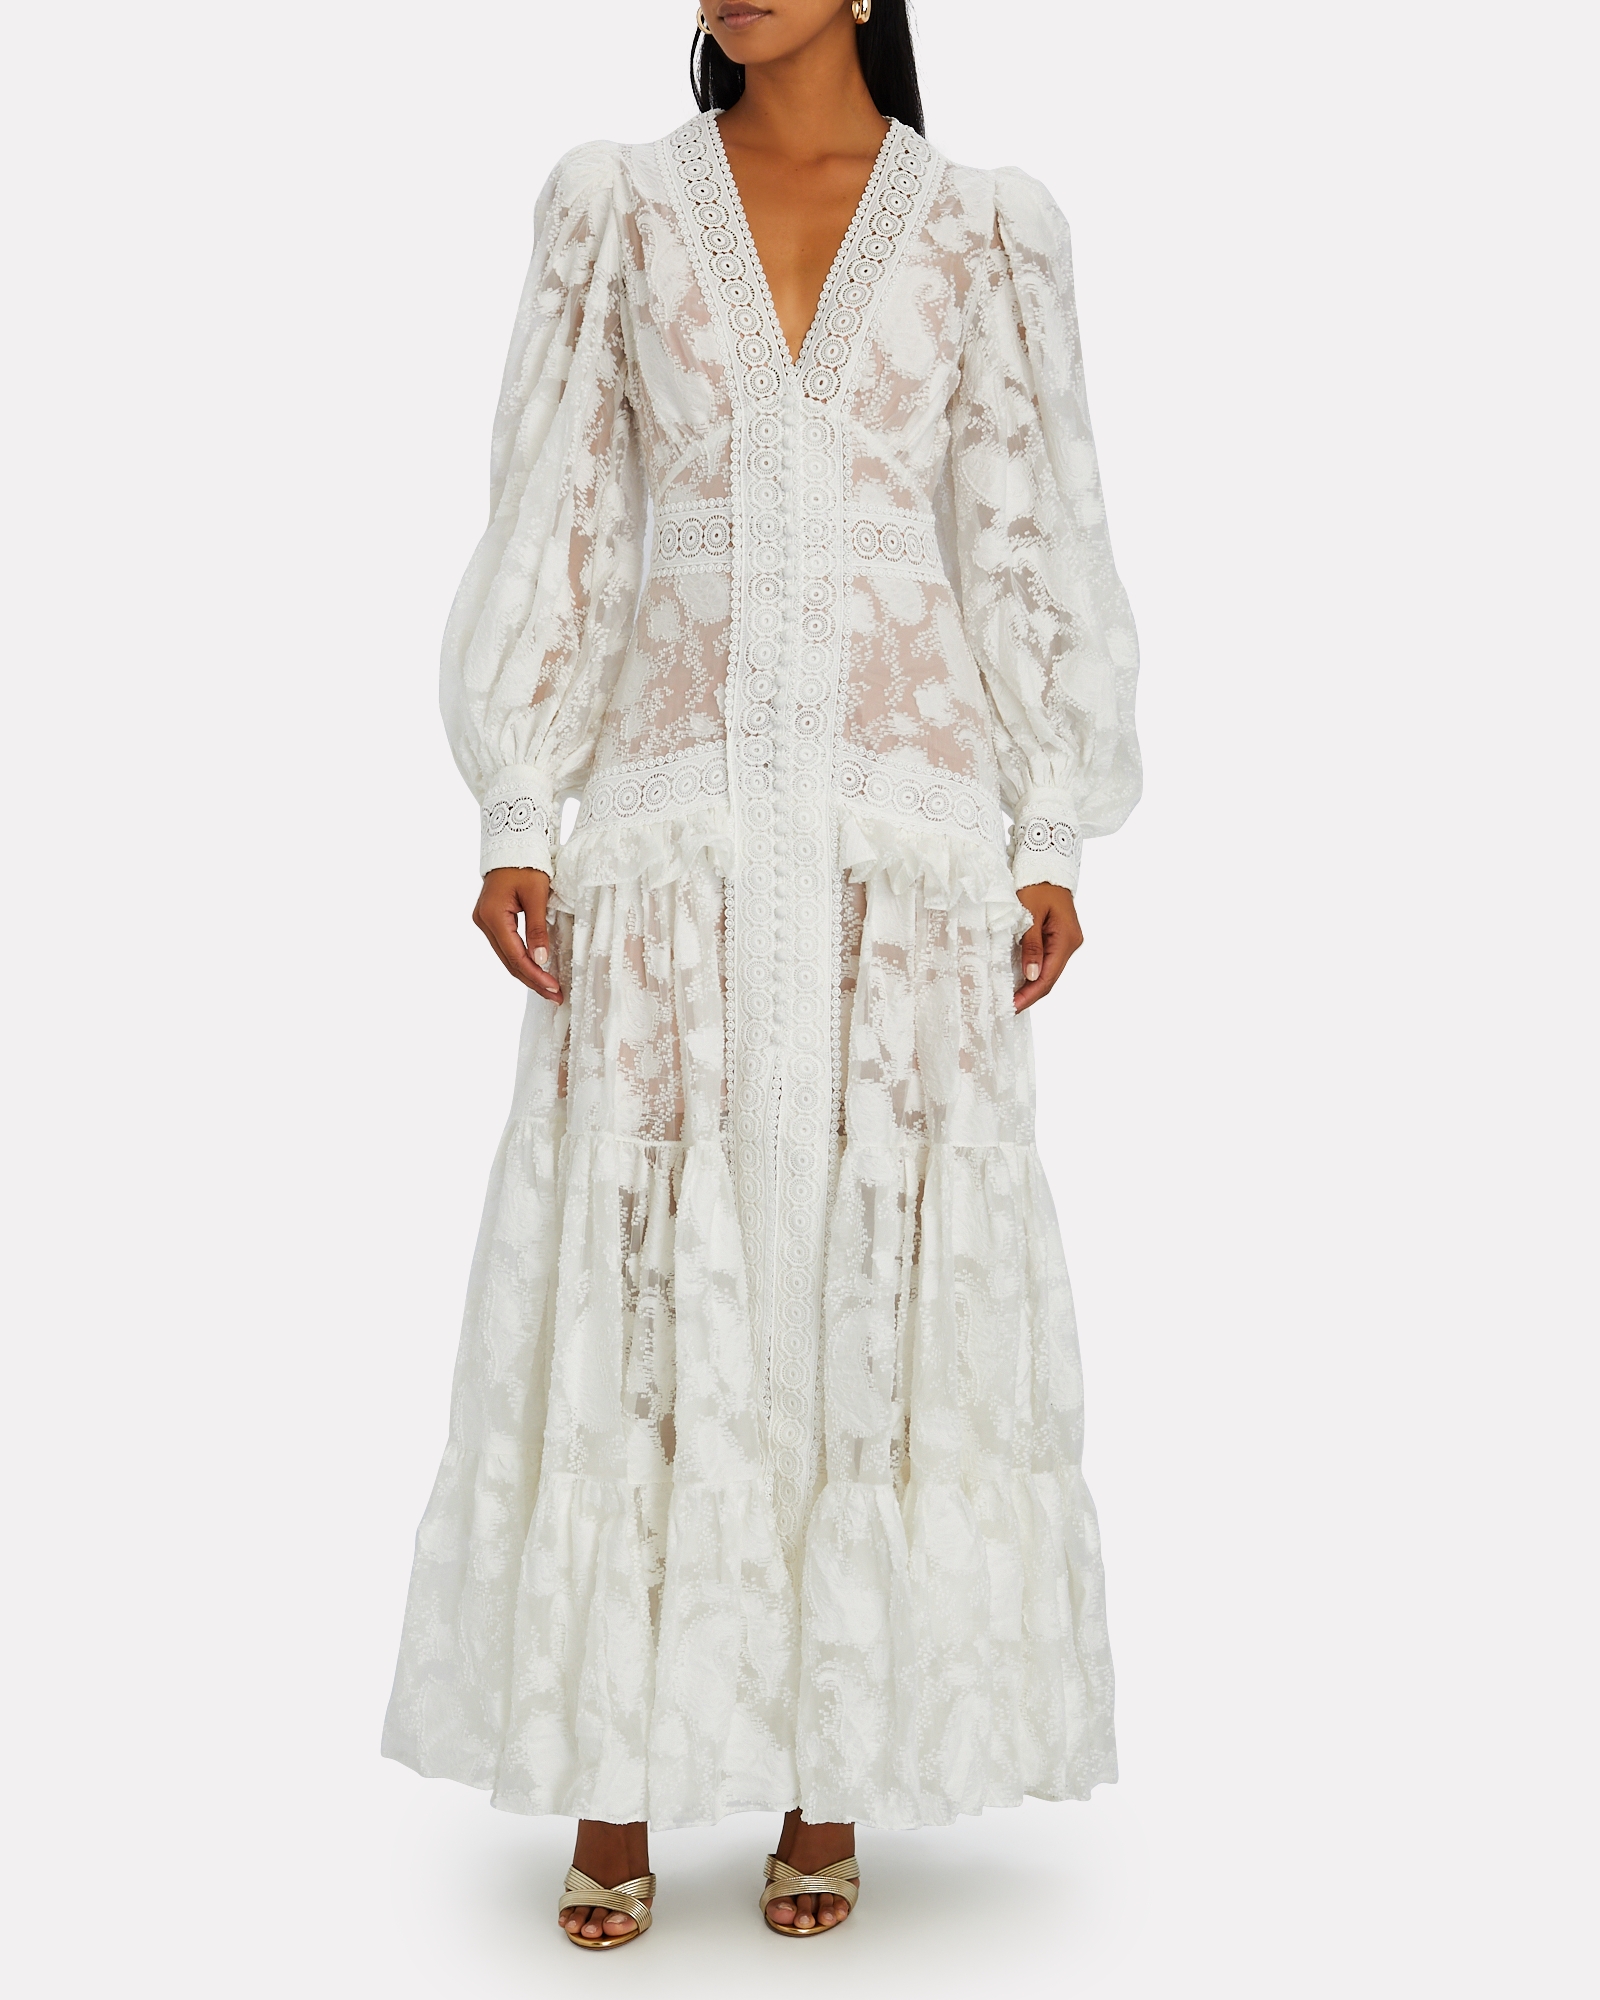 Acler Suffield Lace-Trimmed Chiffon Maxi Dress | INTERMIX®